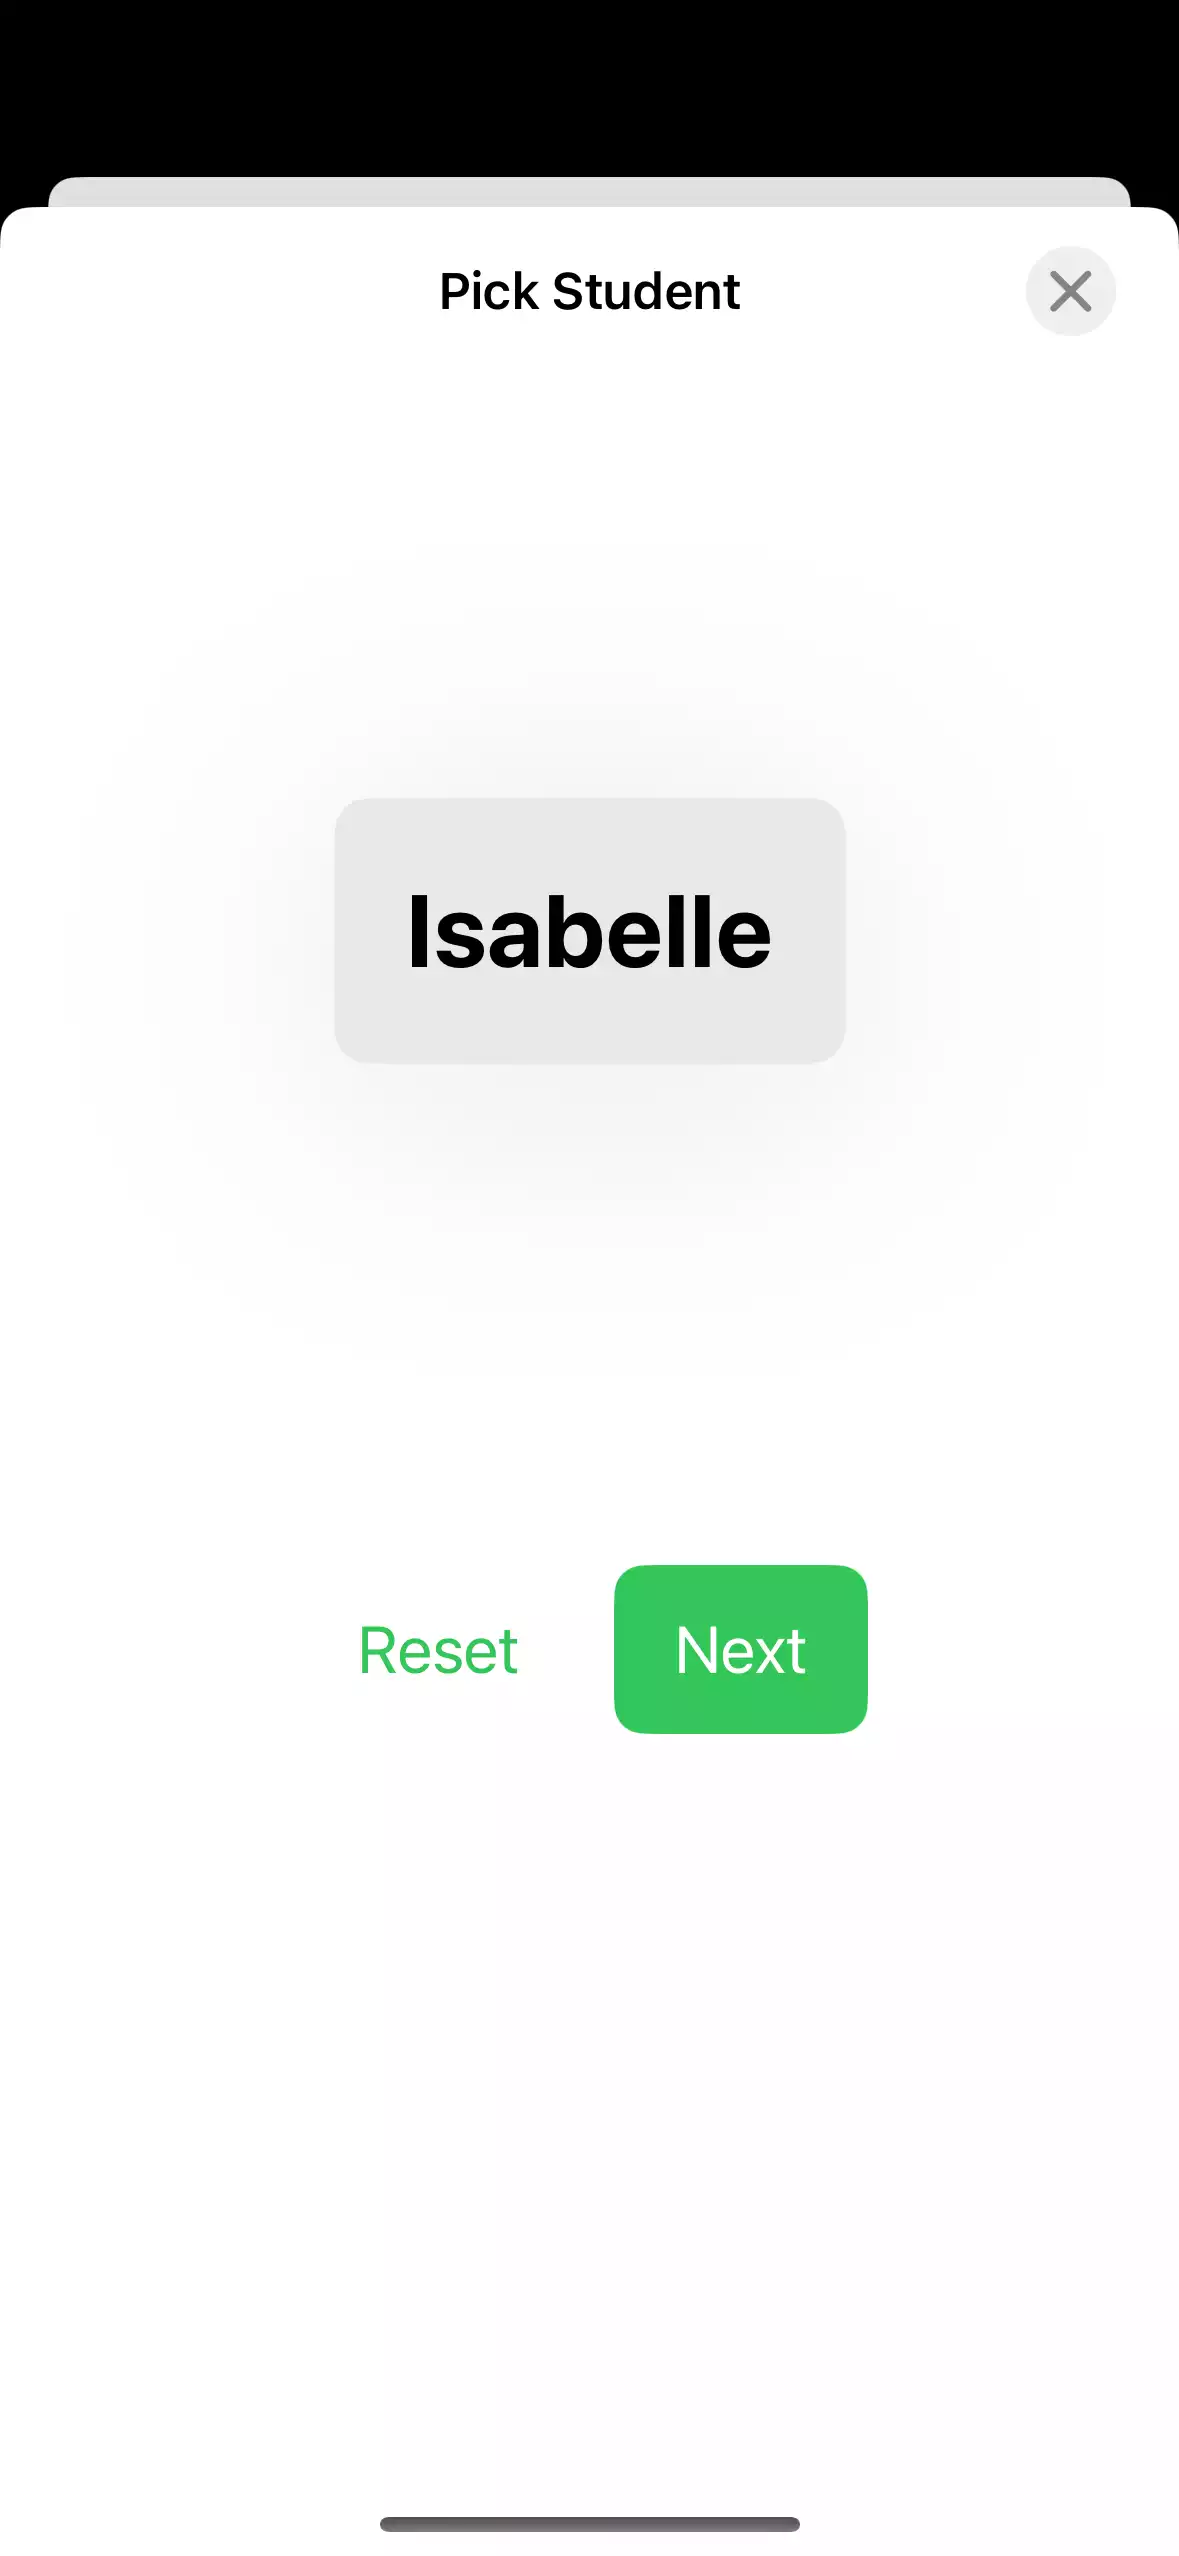 A screenshot of a screen with a “Reset” and “Next” button. The student “Isabelle” is highlighted.